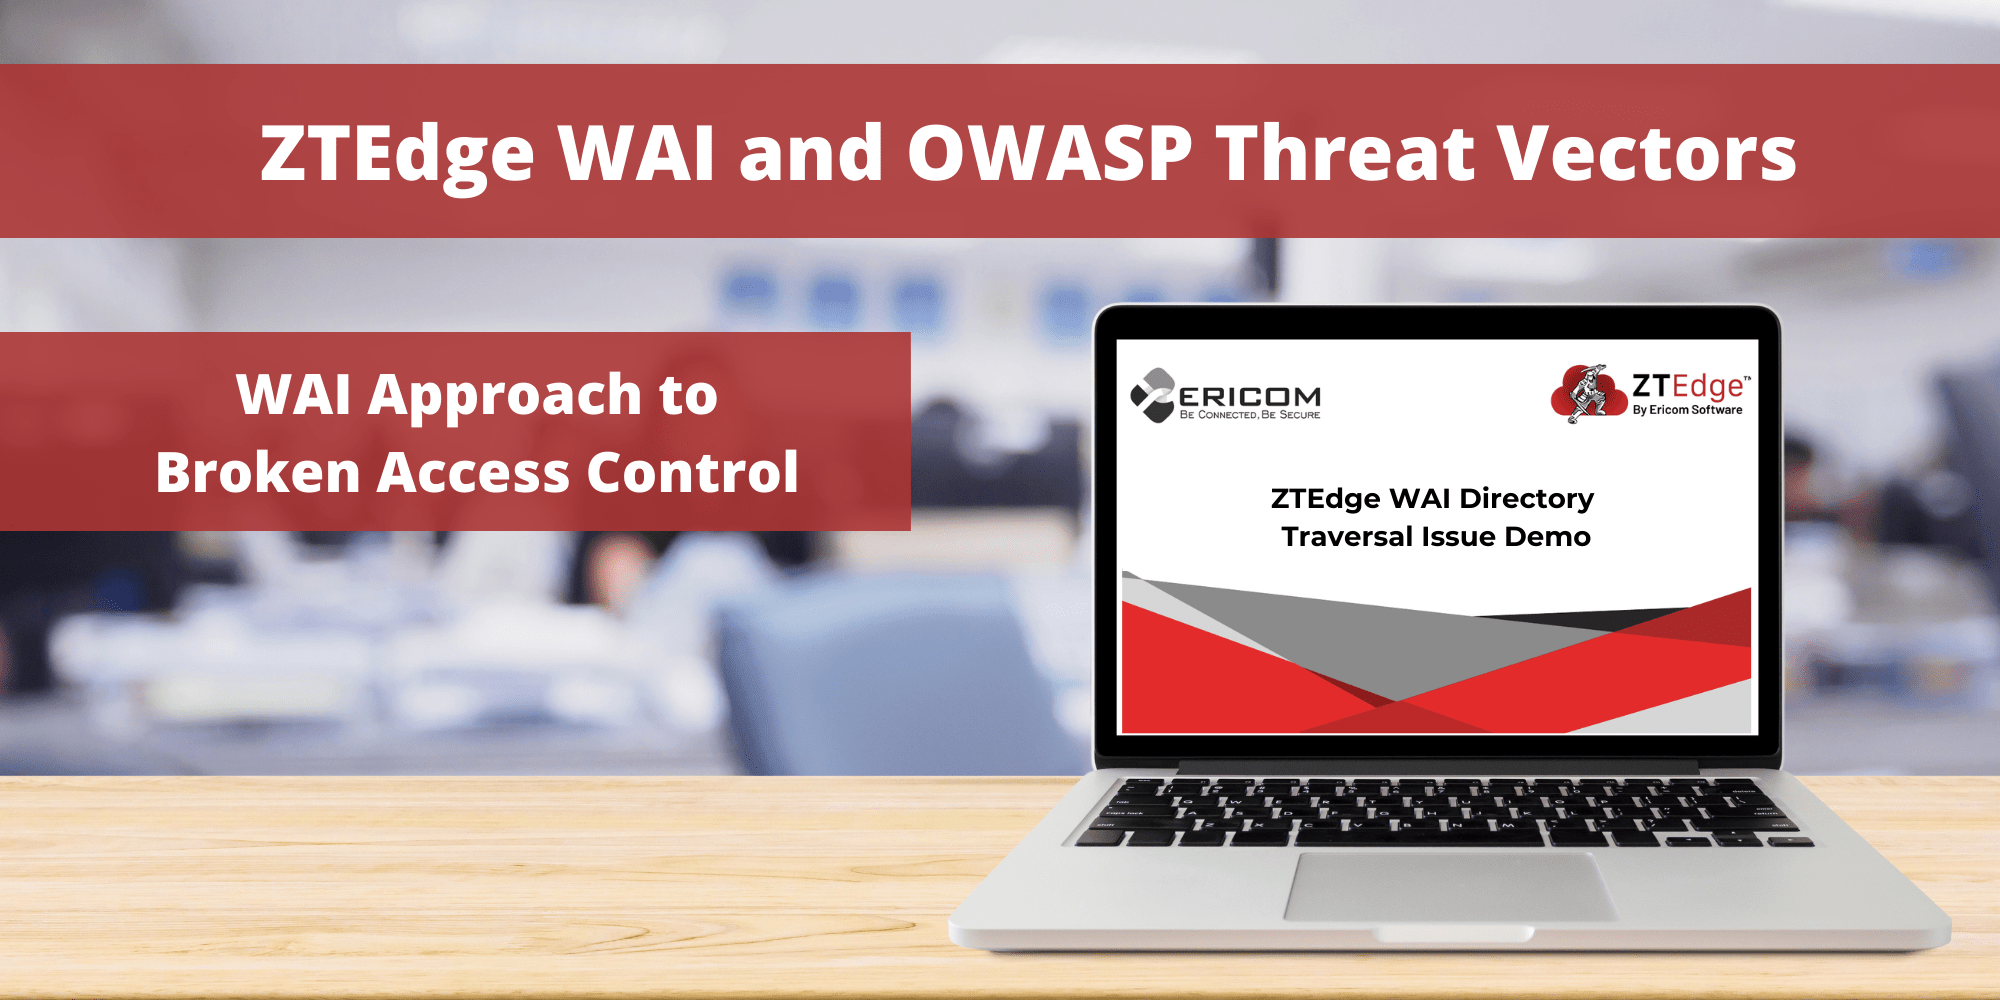 Addressing the OWASP Top 10 Application Security Risks with Web Application Isolation: #1 Broken Access Control featured image